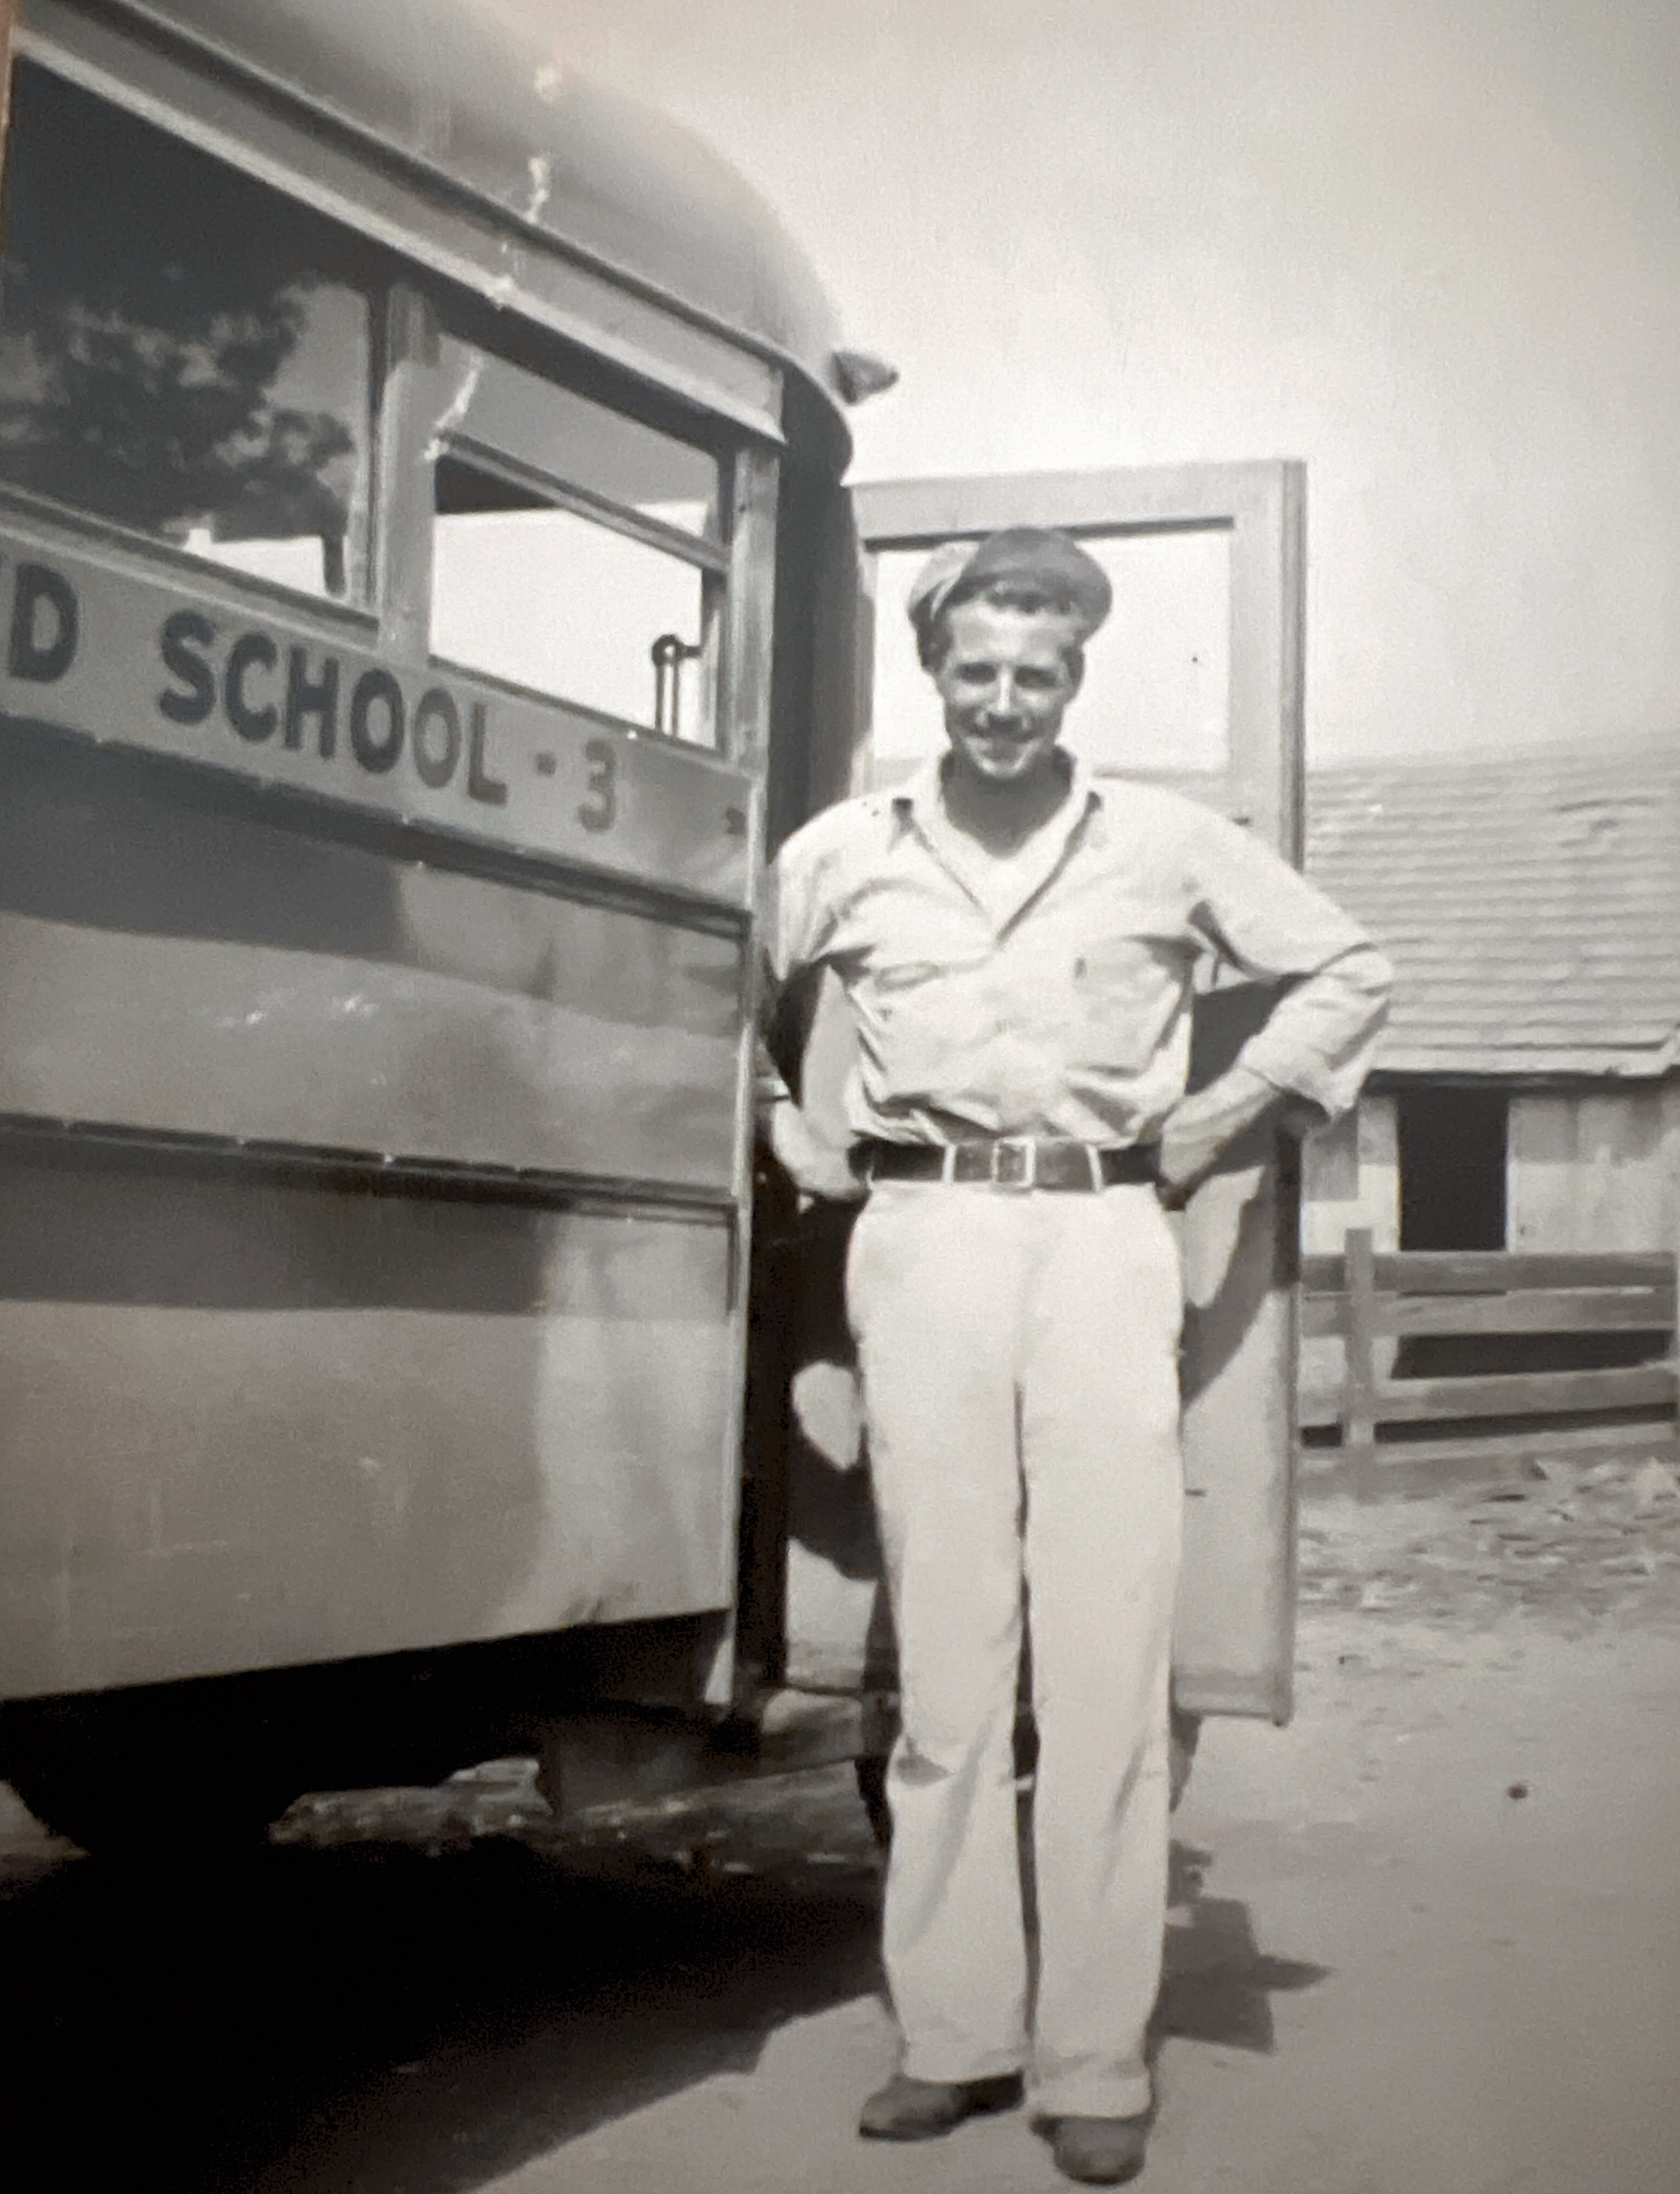 My Dad, school bus driver in 1944. Roger Robert Griffith Sr.